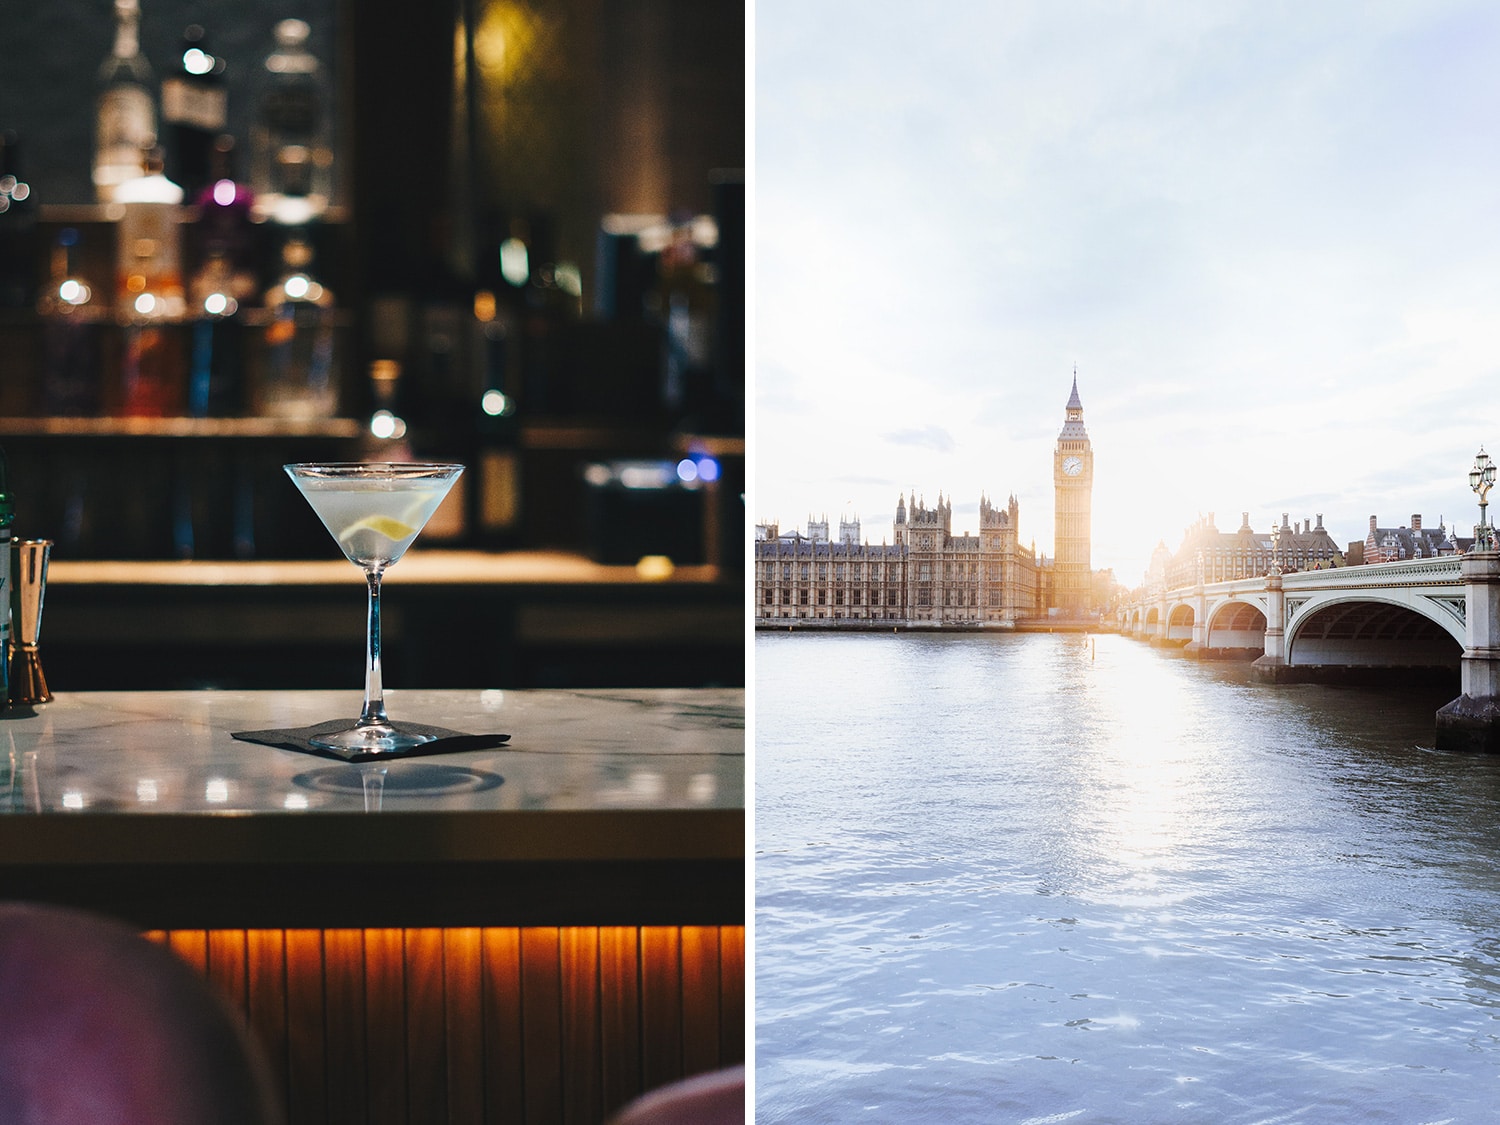 A Vesper martini, the preferred cocktail of James Bond; Big Ben as seen from the Thames River.